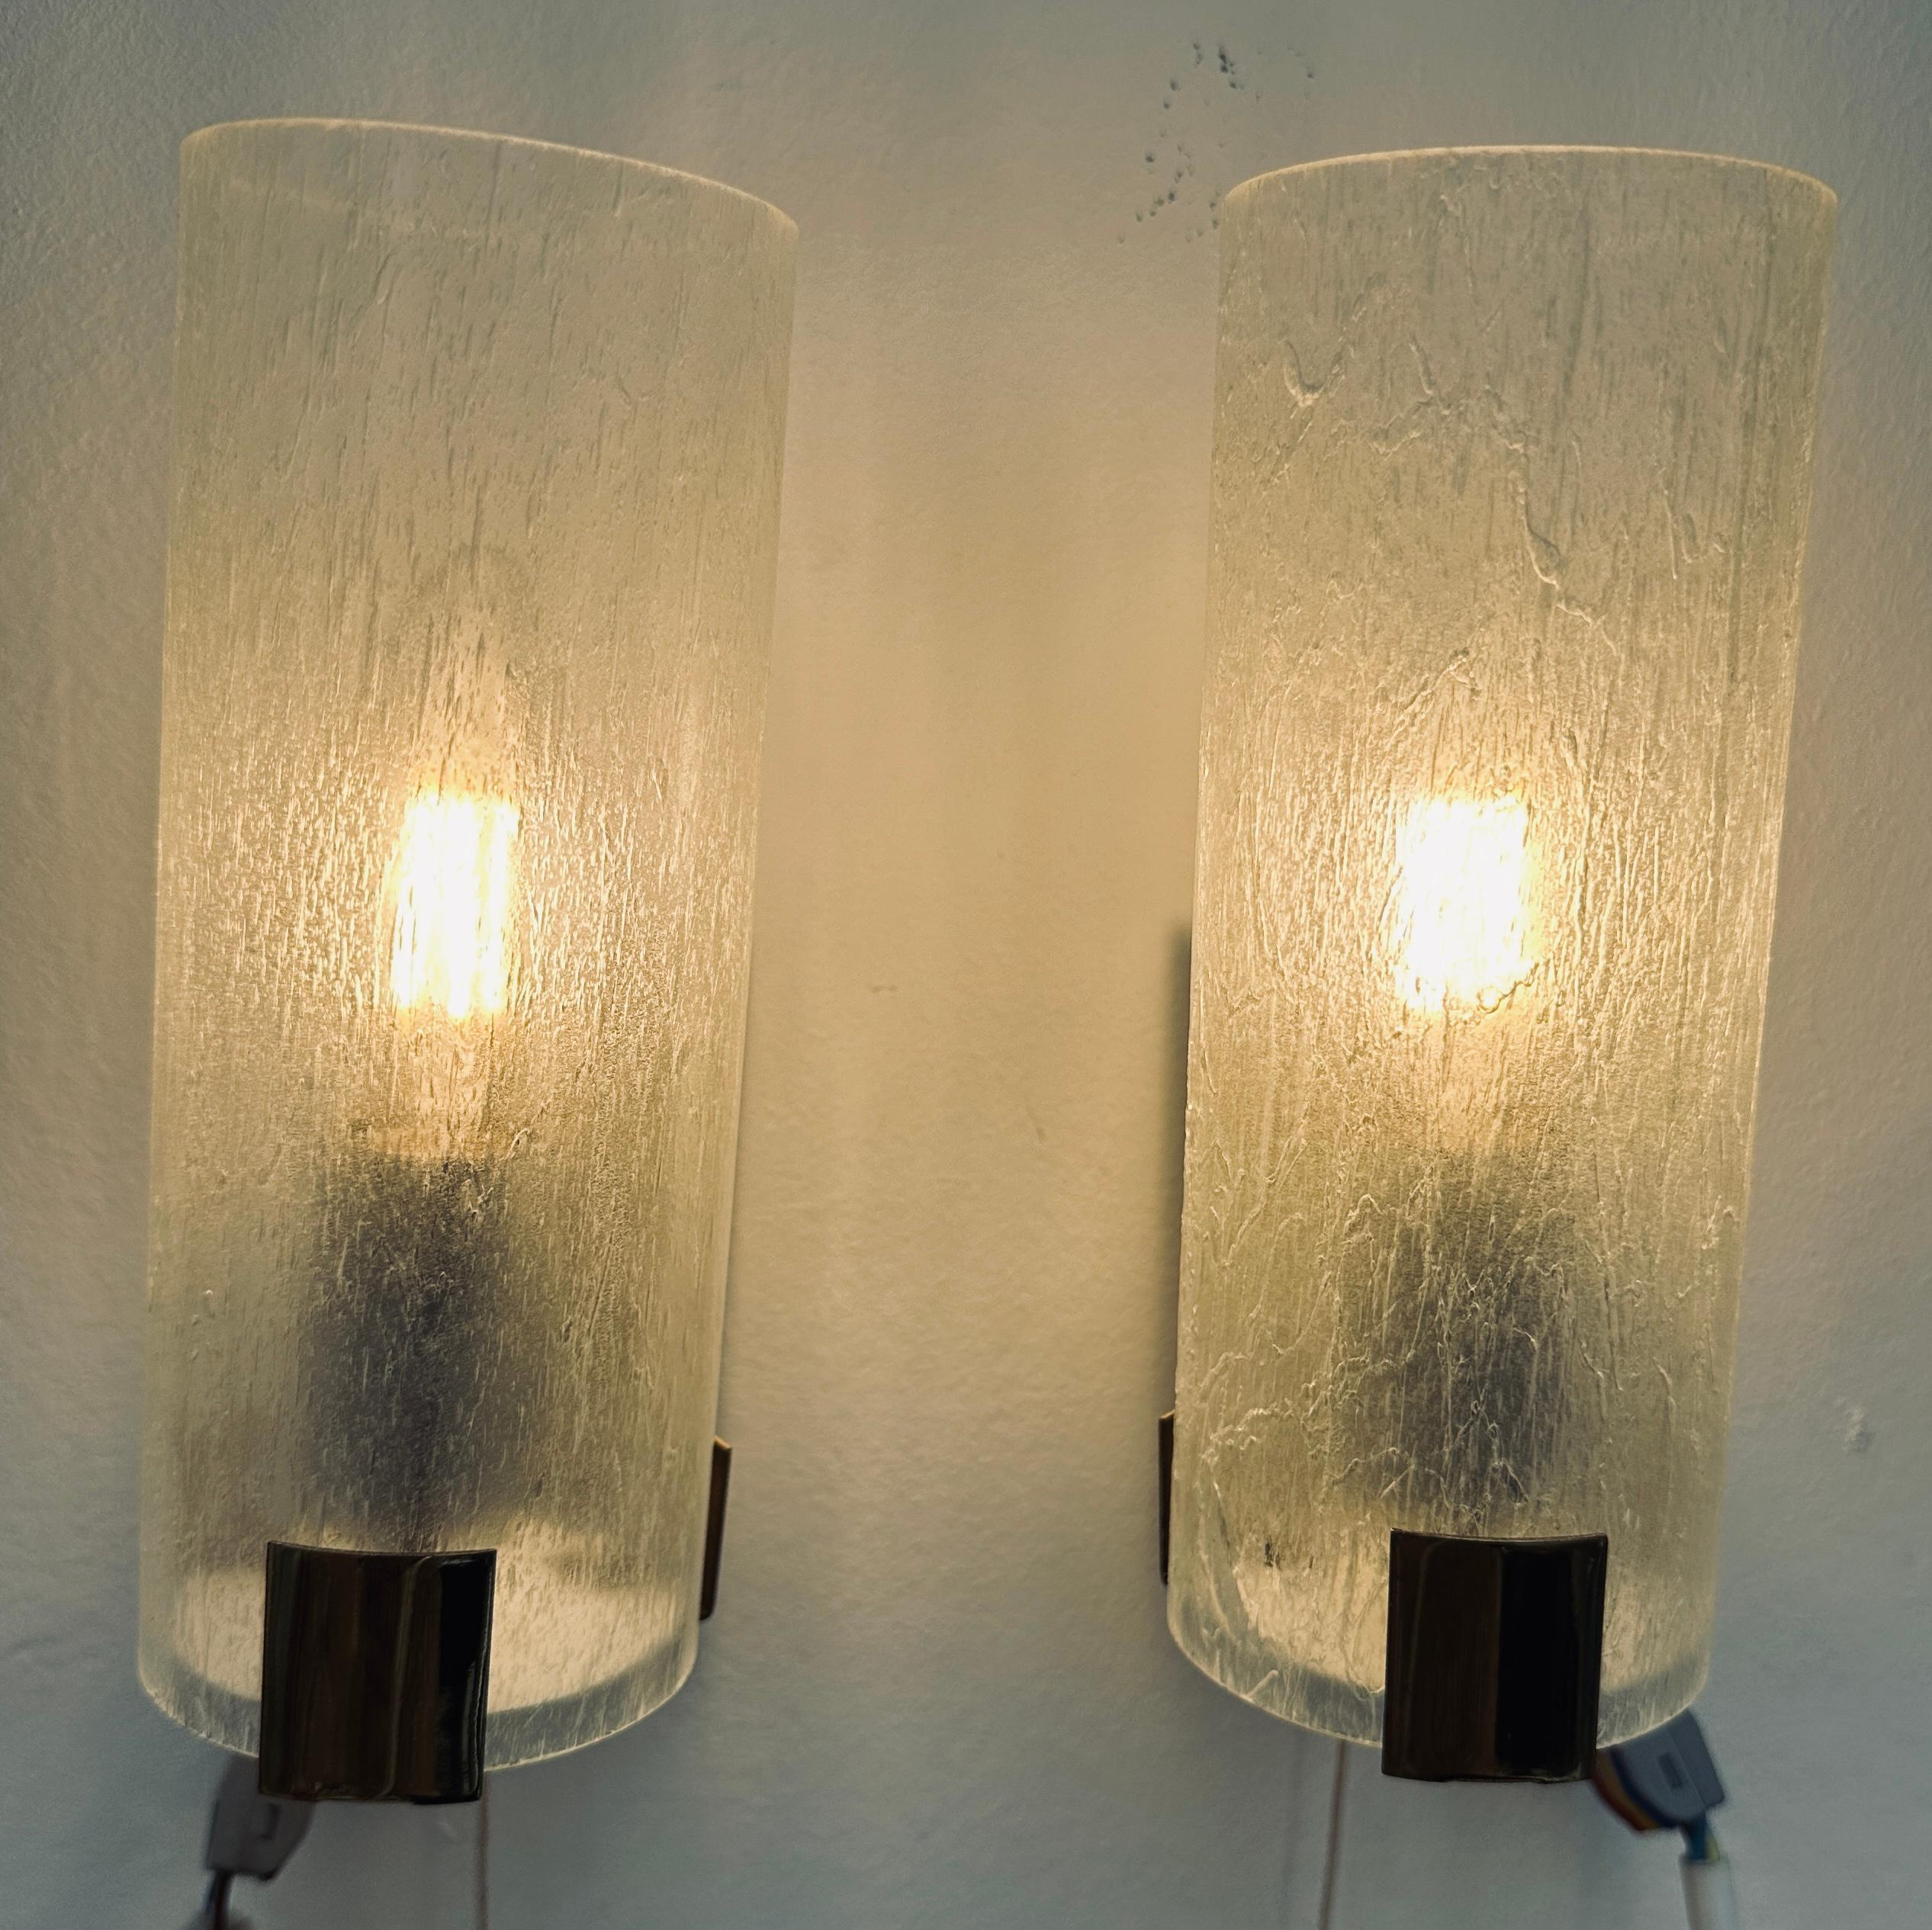 Pair of 1970s German frosted tubular glass wall light sconces on a gold plastic coated metal frame in the style of Doria Leuchten.  The mottled frosted glass tube sits on top of the frame and is held in place with a rectangular slot cut into the